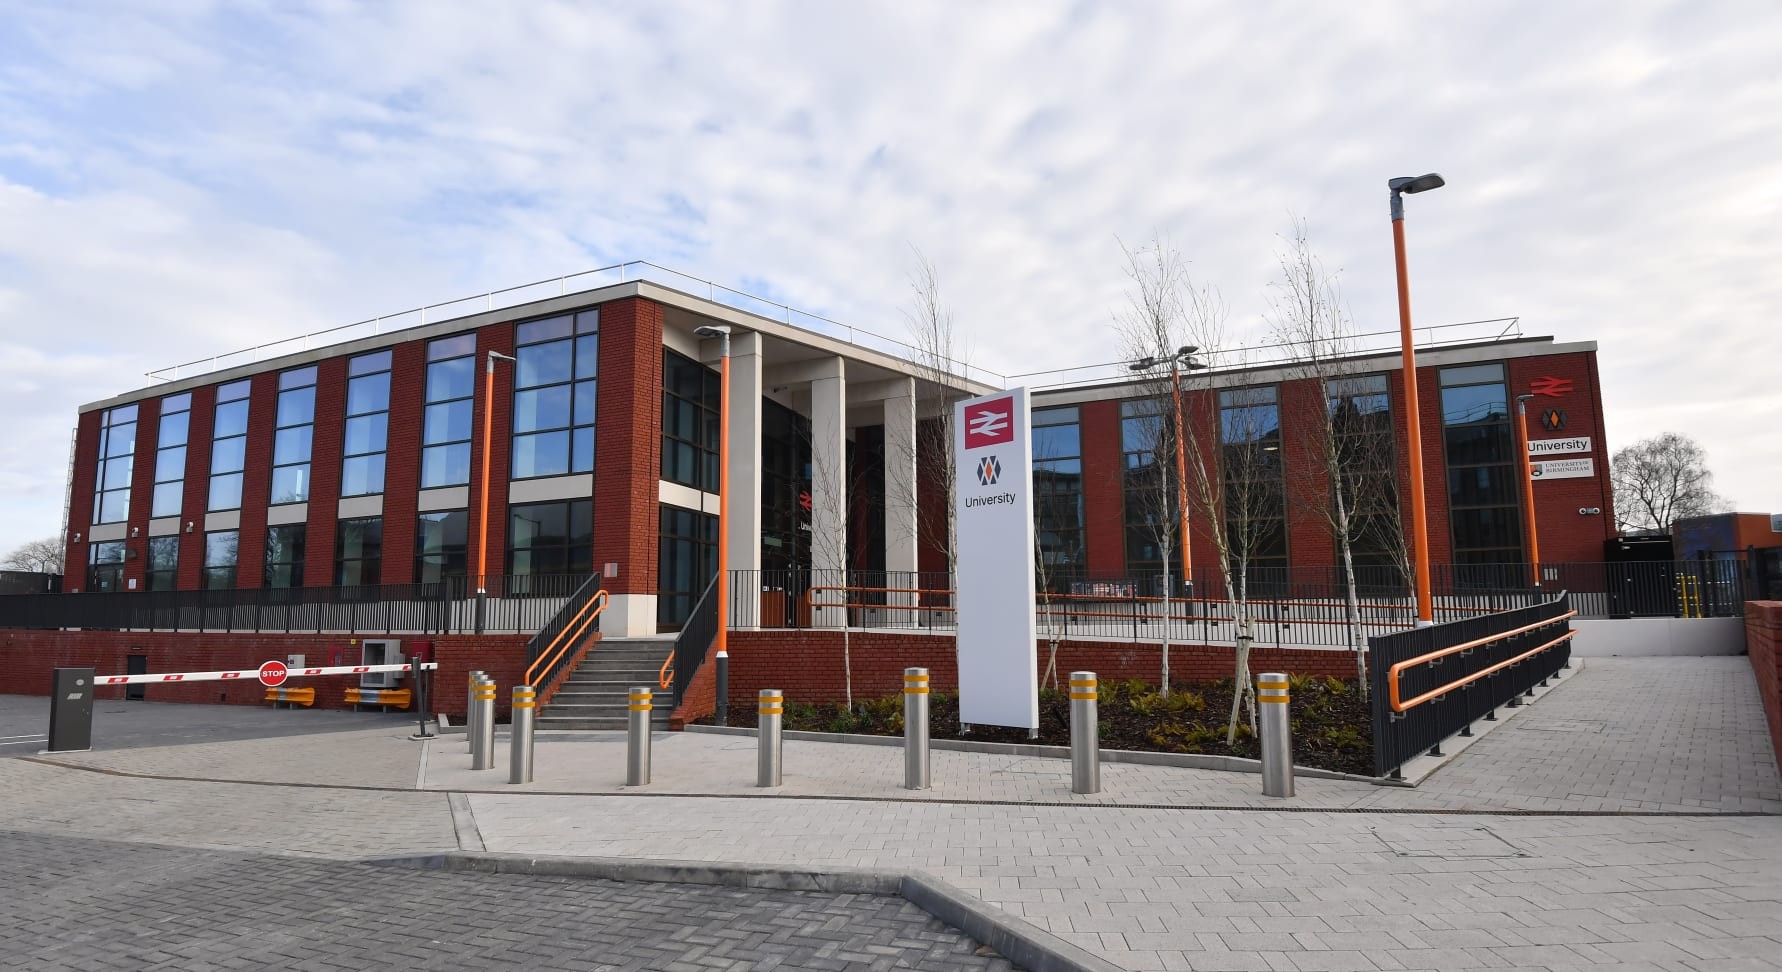 New University Station buildings to open their doors this Sunday